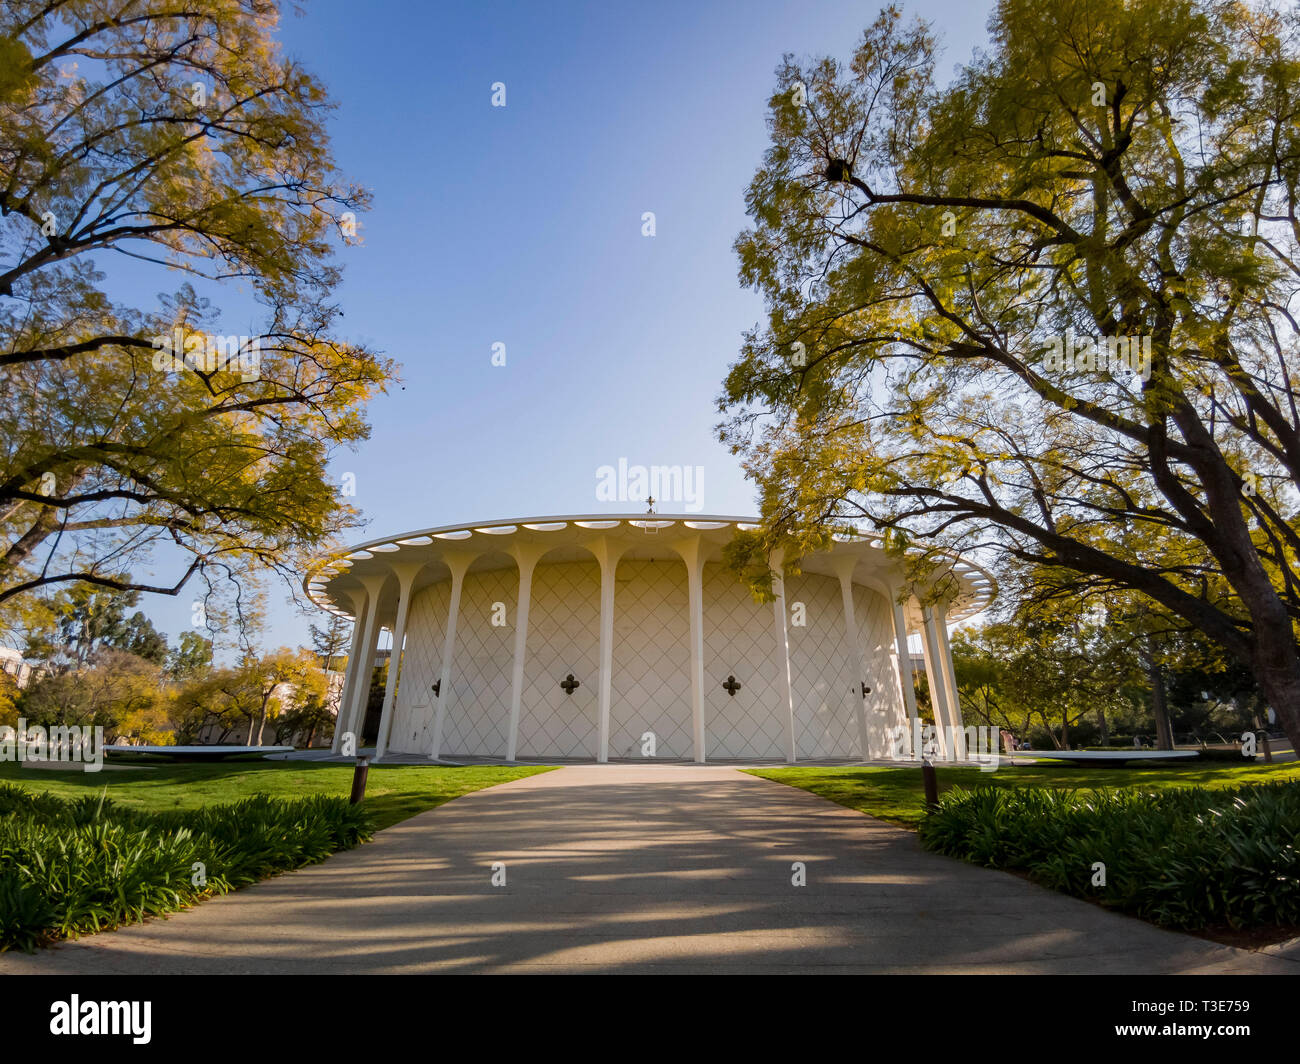 Los Angeles, MAY 24: Exterior view of Beckman Auditorium in Caltech on MAY 24, 2019 at Los Angeles, California Stock Photo